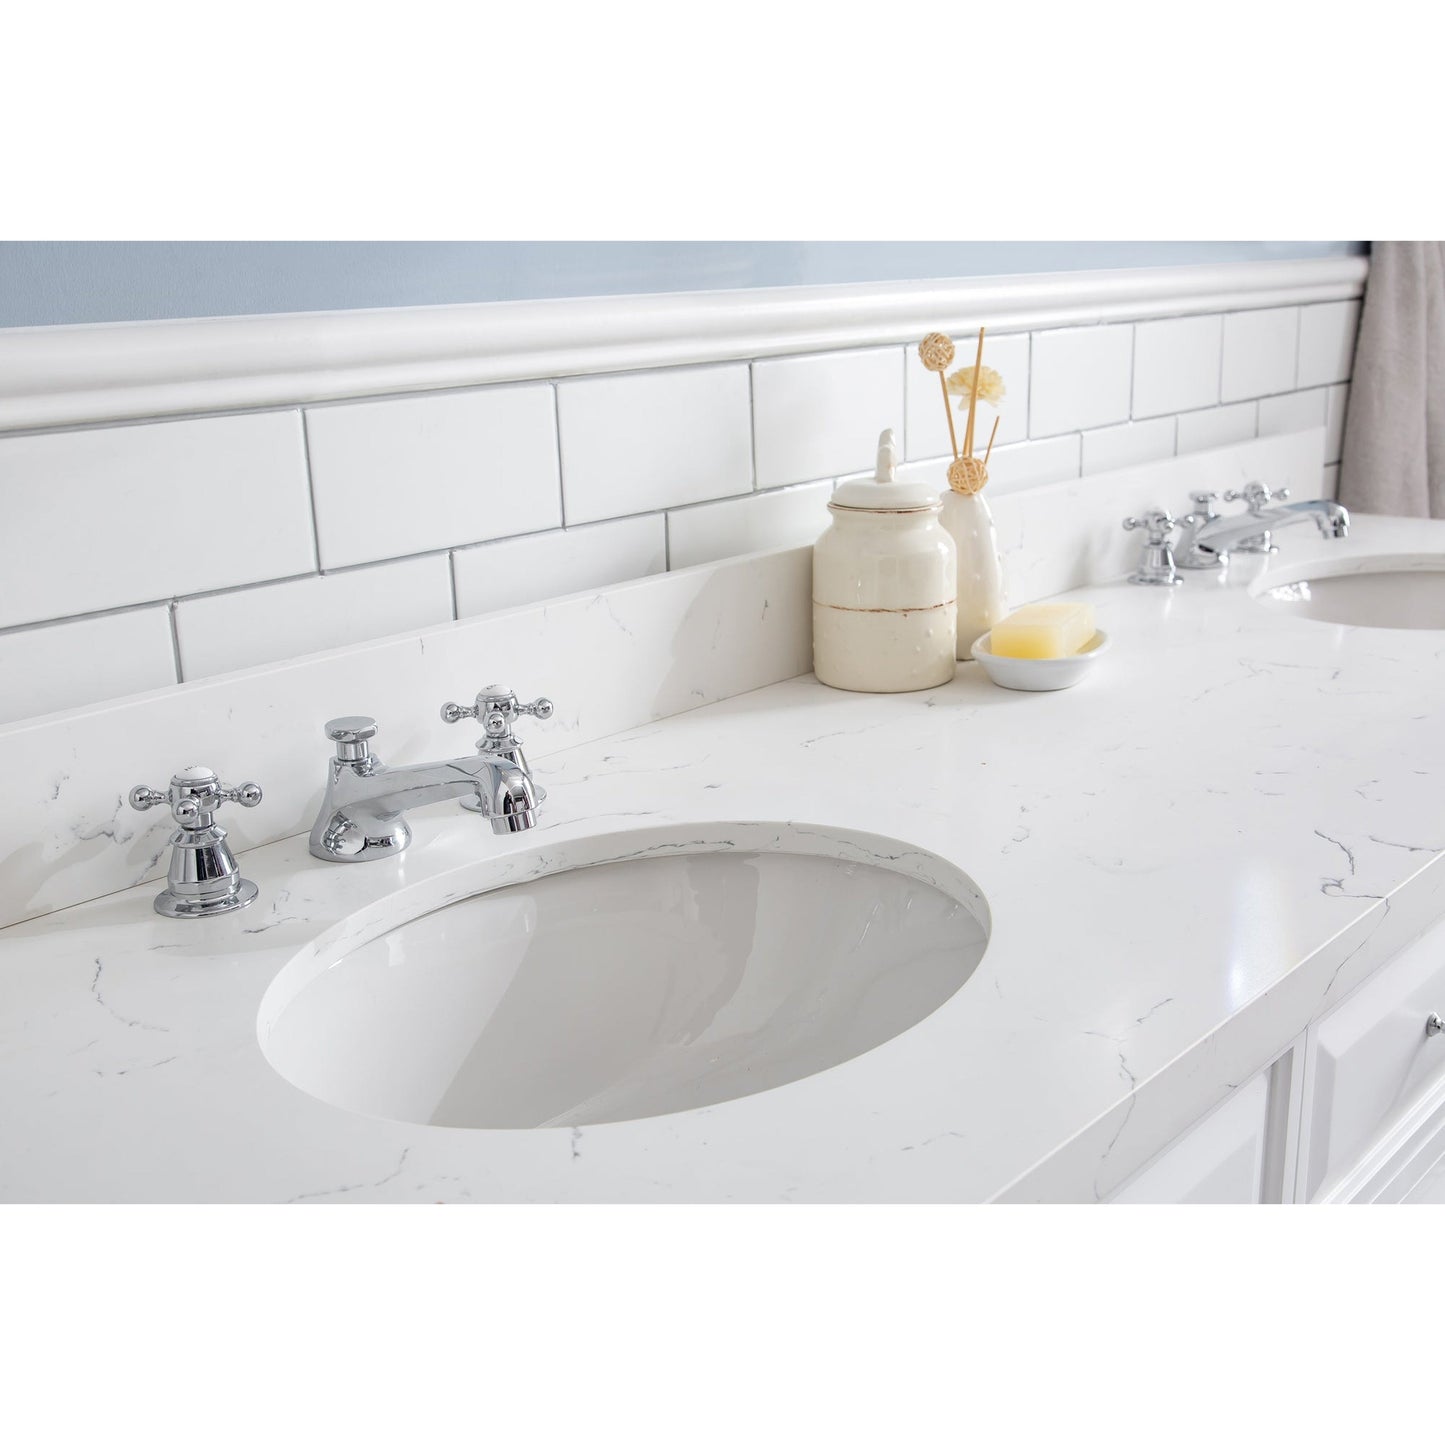 Water Creation Palace 72" Quartz Carrara Pure White Bathroom Vanity Set With Hardware And F2-0009 Faucets in Chrome Finish